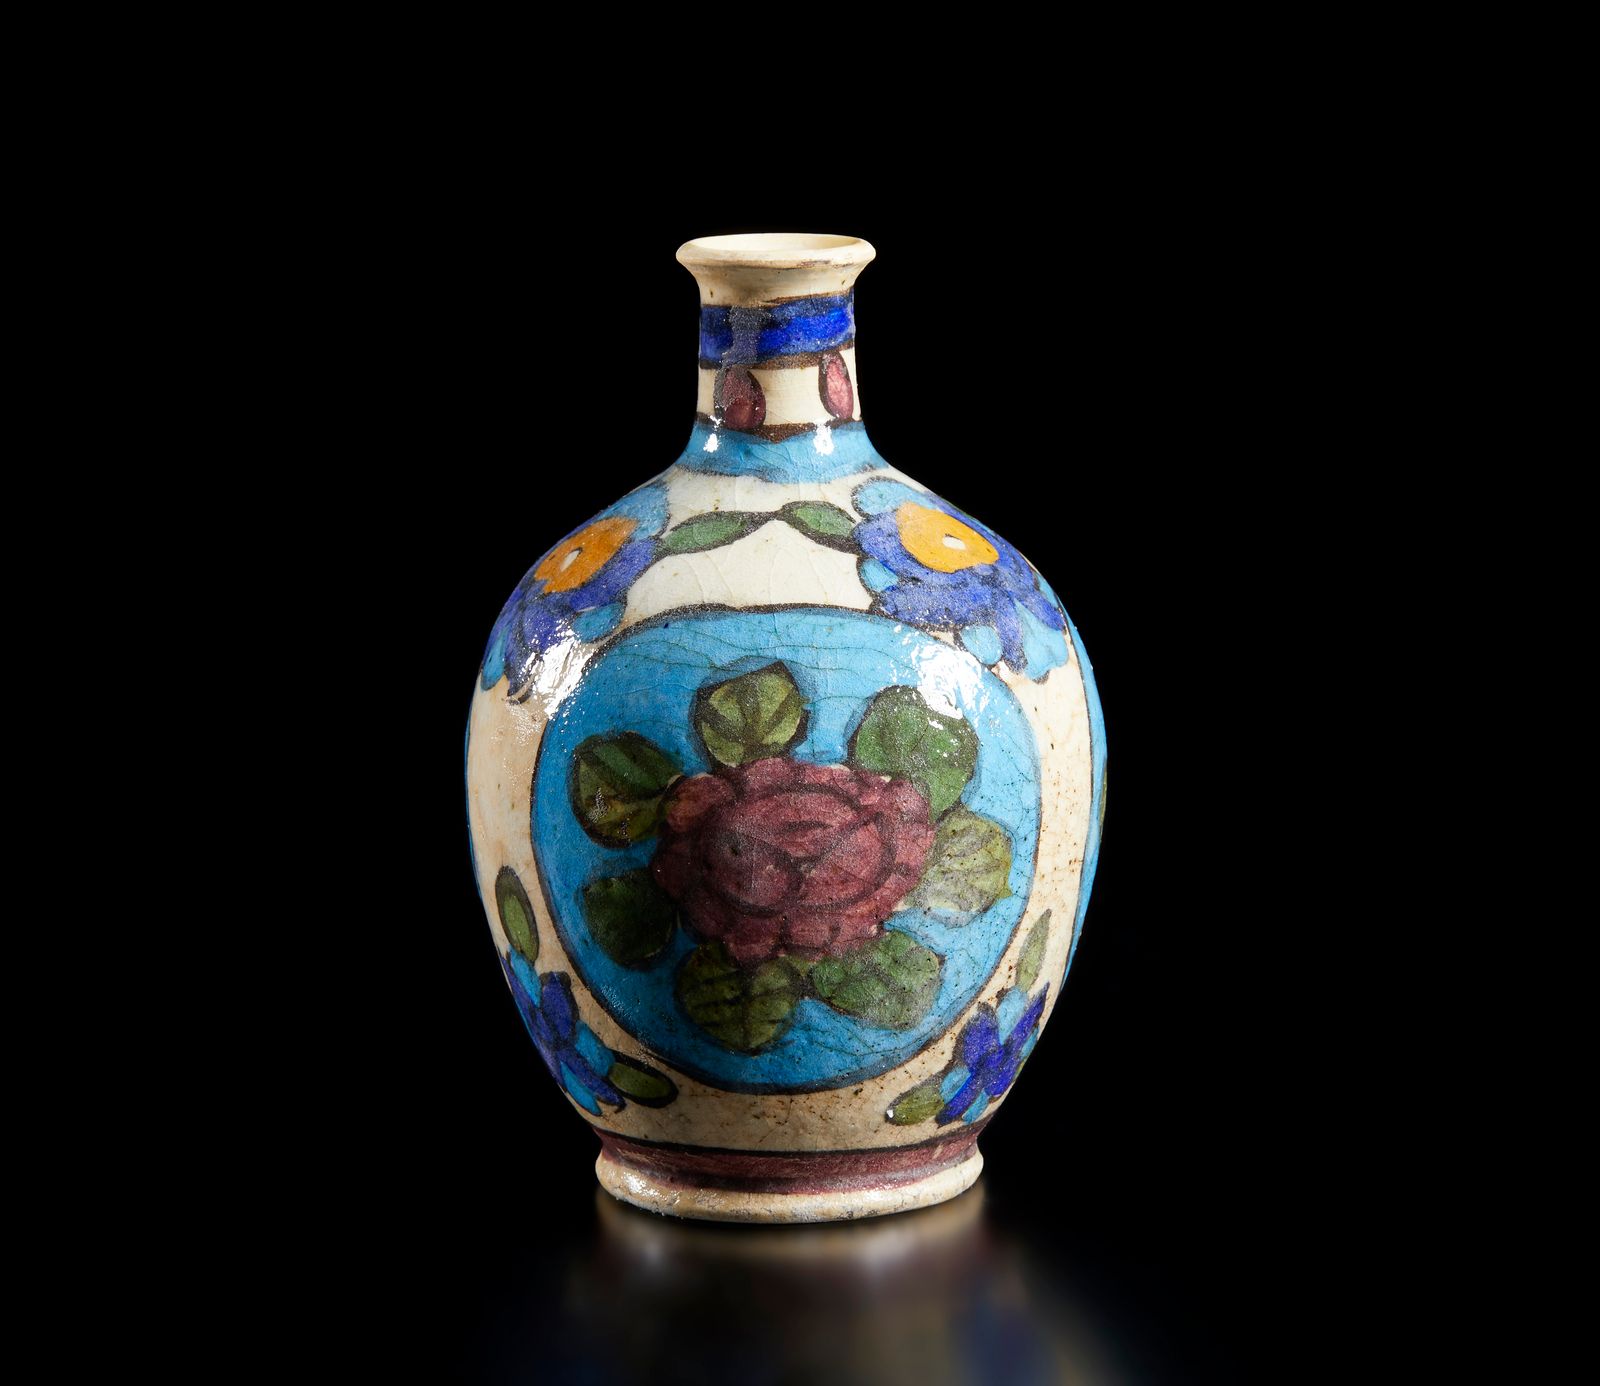 Islamic Art A pottery bottle vase painted with flowers 伊斯兰艺术。画有花的陶瓶 伊朗，19-20世纪。C&hellip;